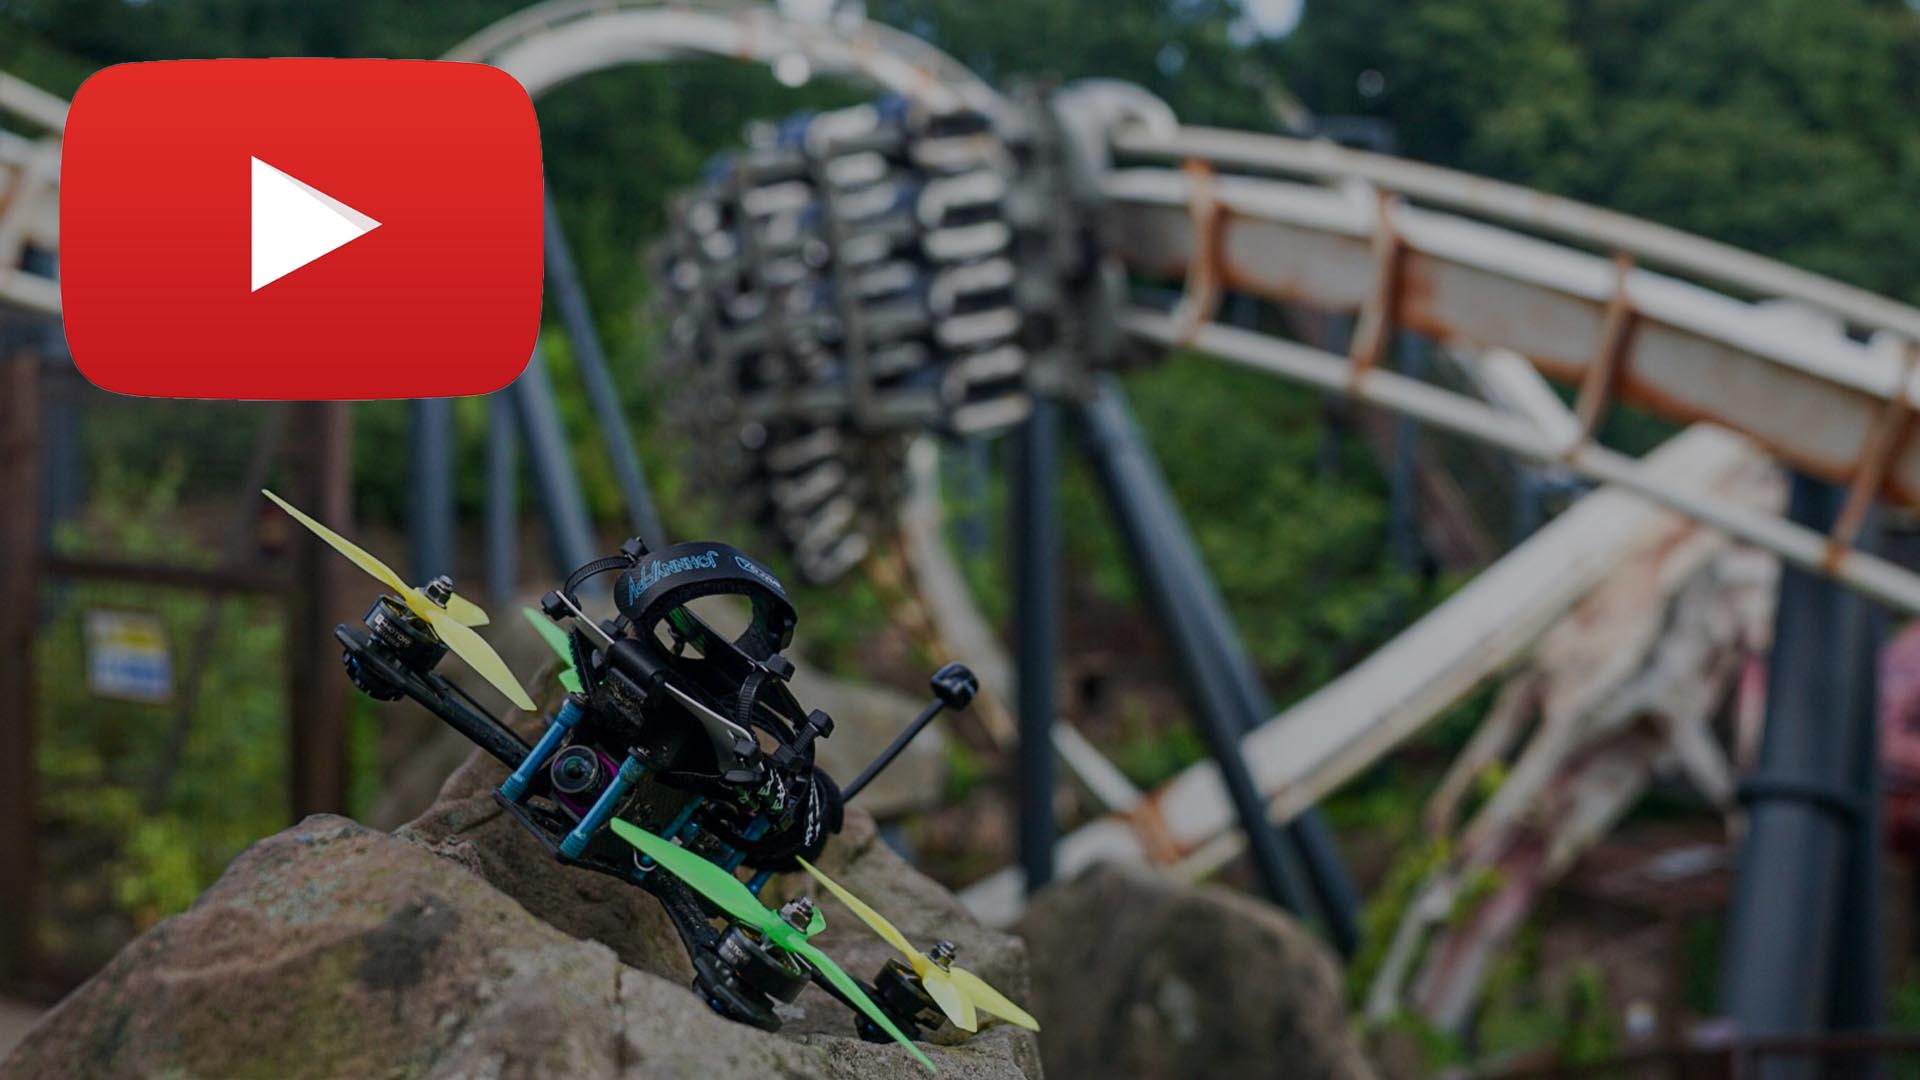 Altitude Aerial Photography Ltd's work filming the Nemesis roller coaster